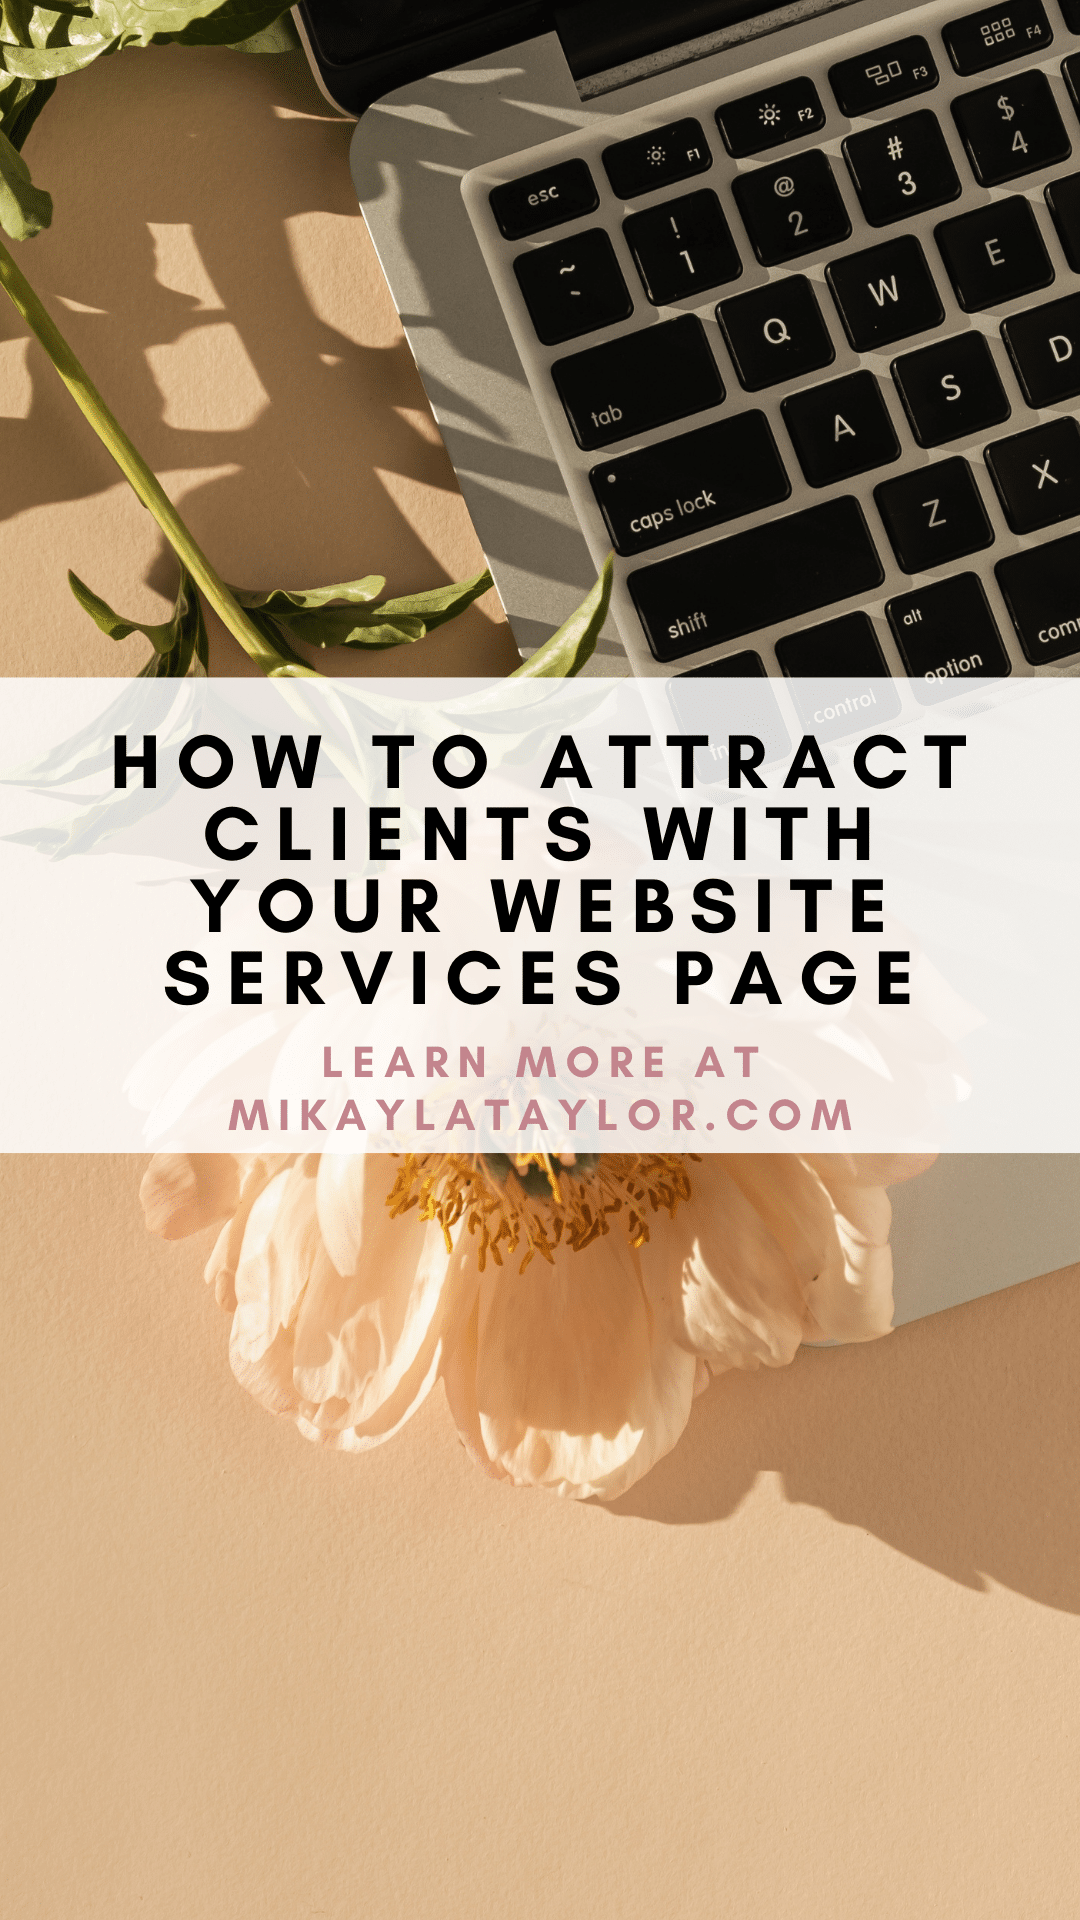 How to Attract Clients with your Website Services Page Pinterest3